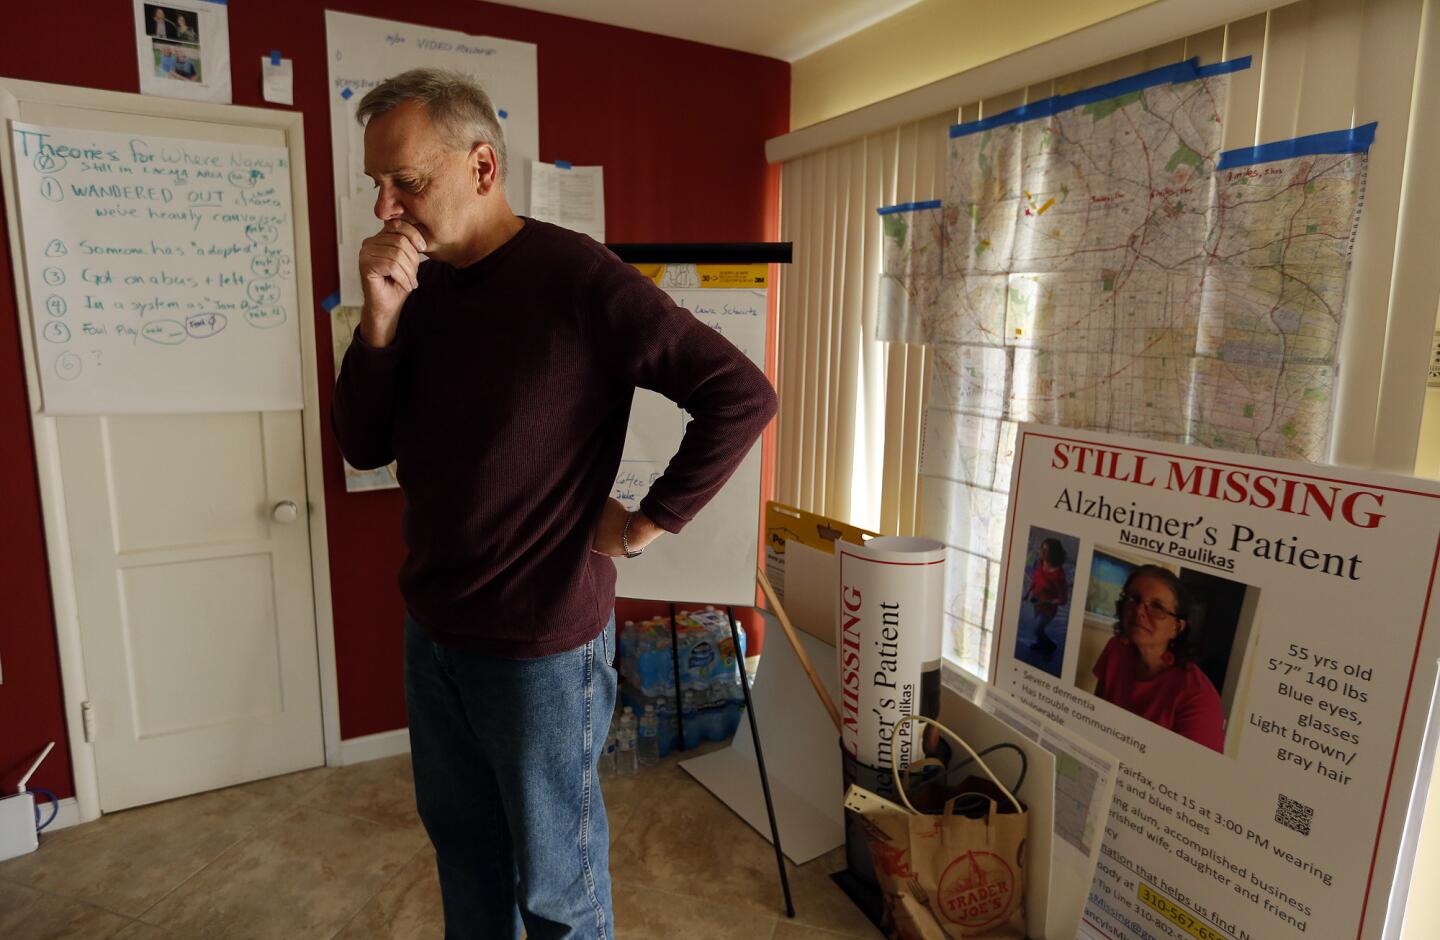 Kirk Moody is surrounded by maps and posters from the effort to find his wife, Nancy Paulikas, suffering from Alzheimer's disease and missing since Oct. 15, 2016.